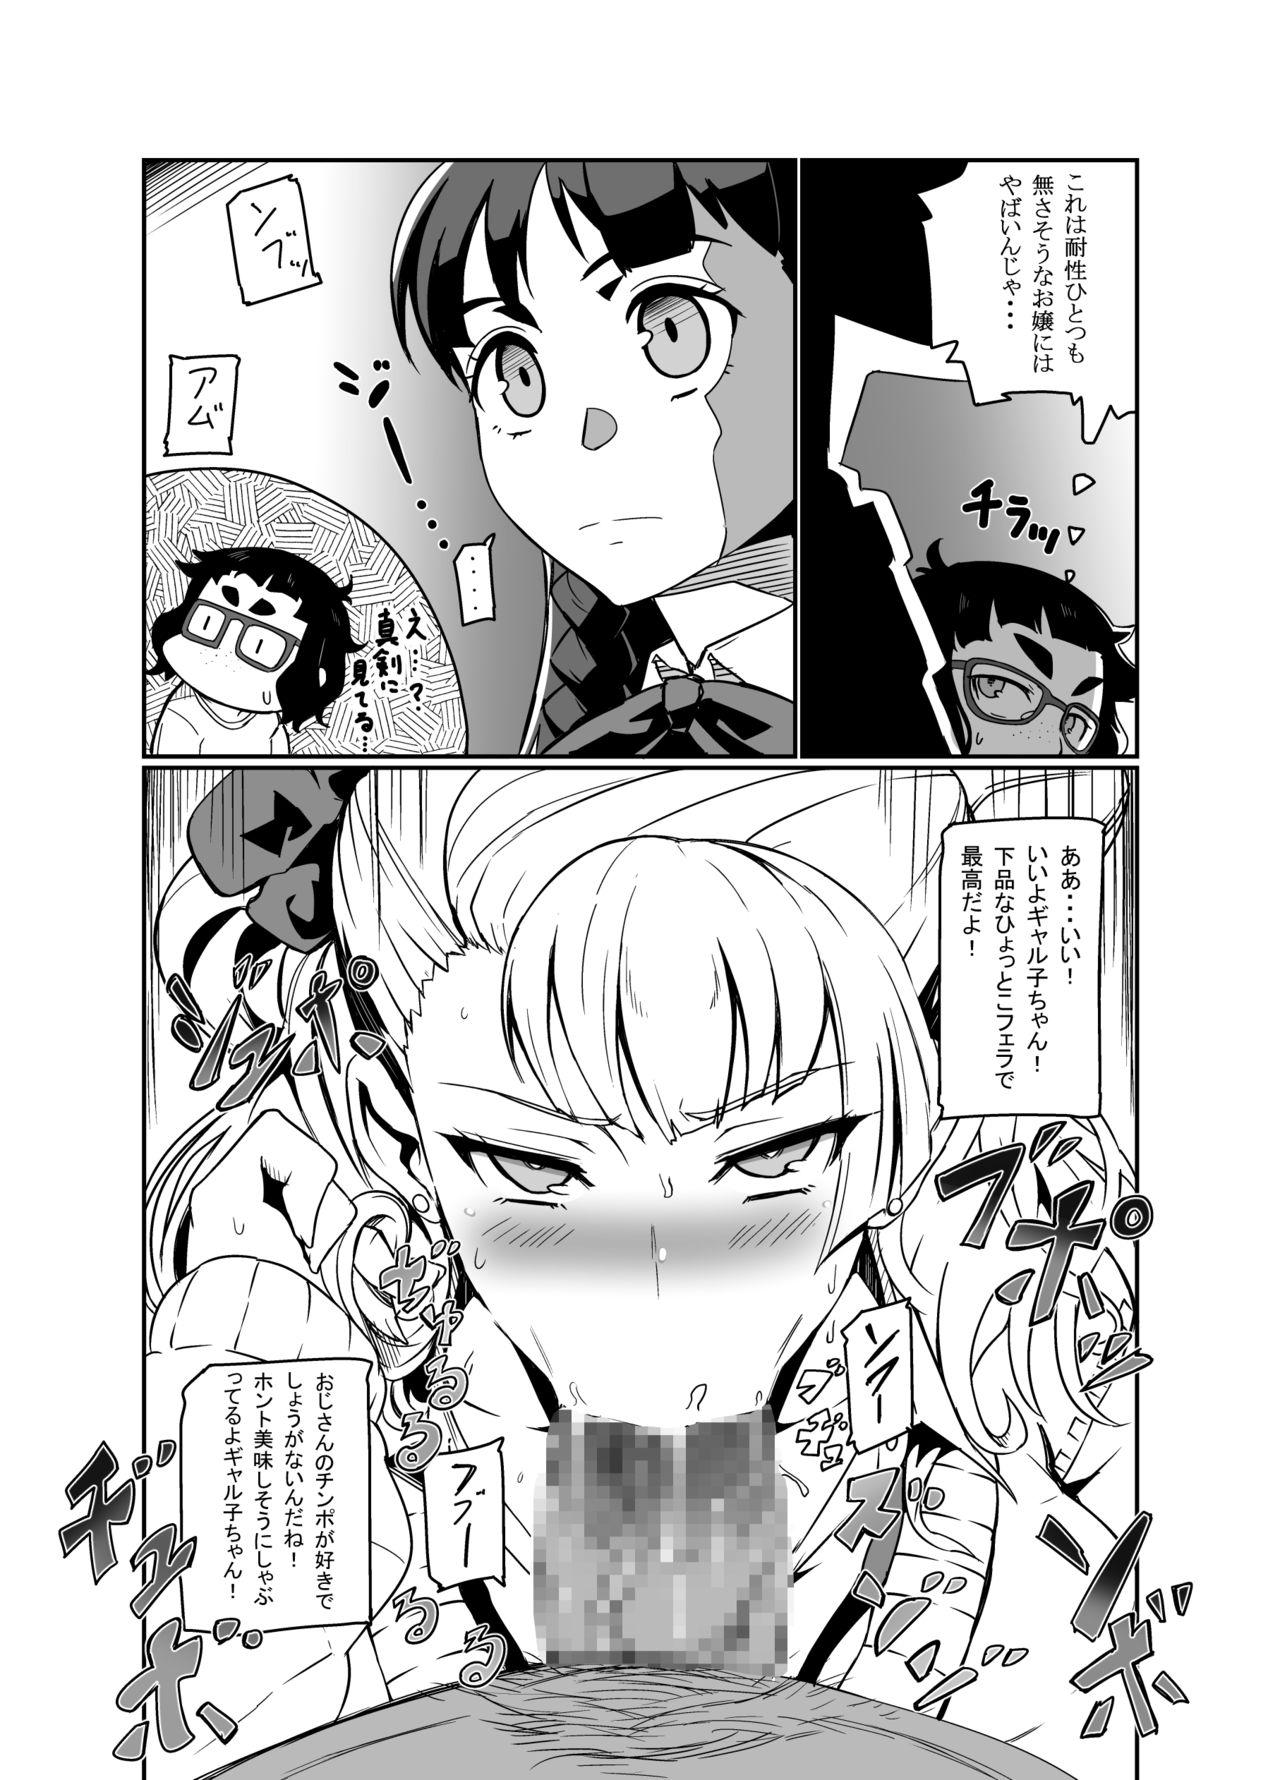 Game Galko Ah! - Oshiete galko chan Leather - Page 8